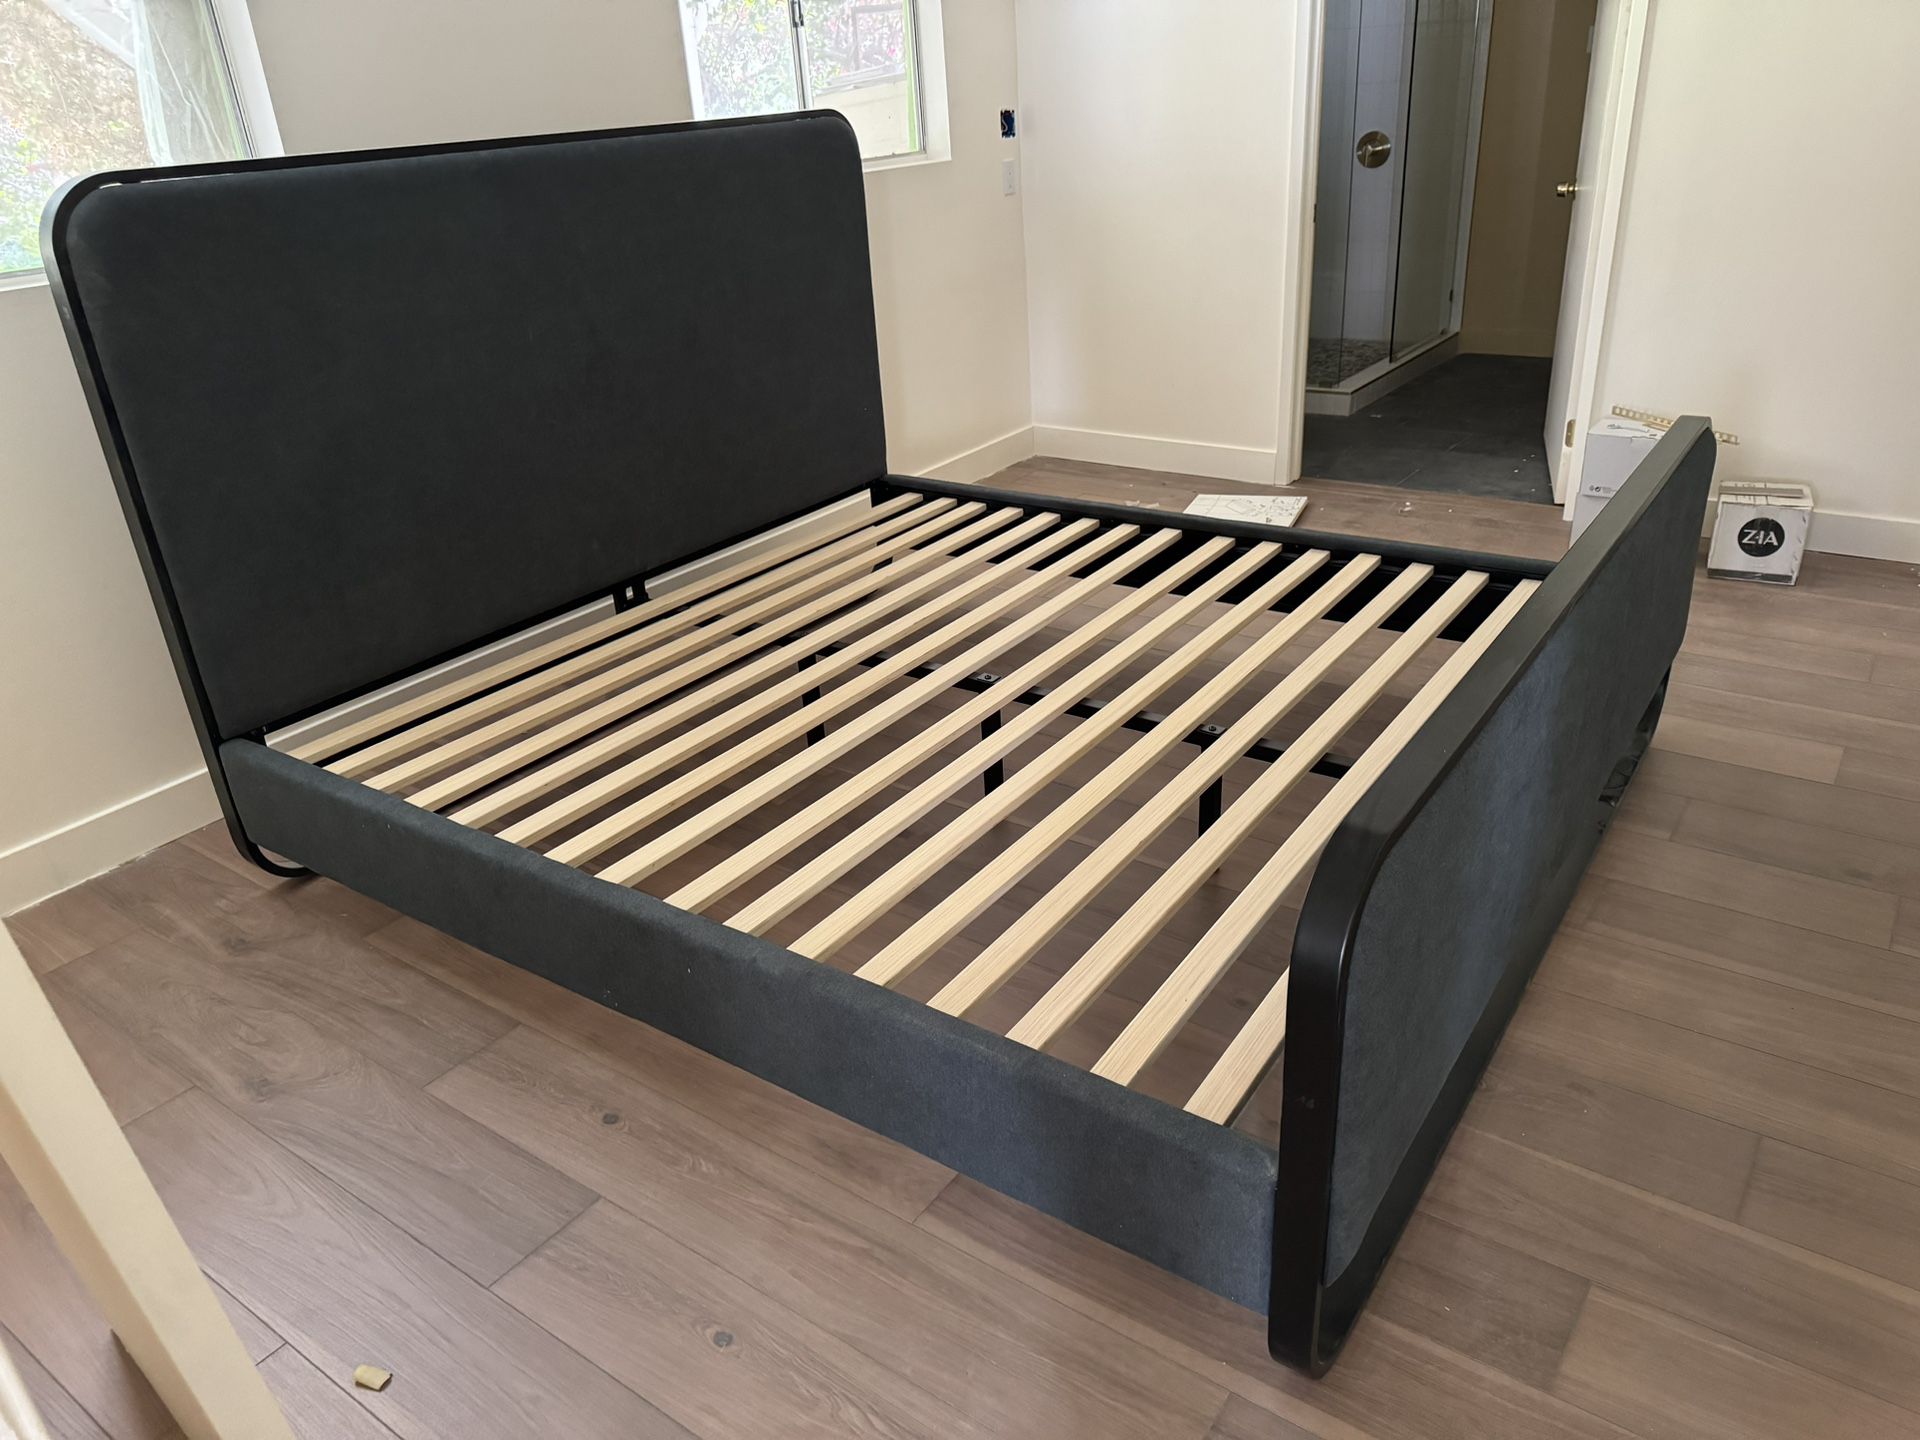 King Size Bed Frame- Never used